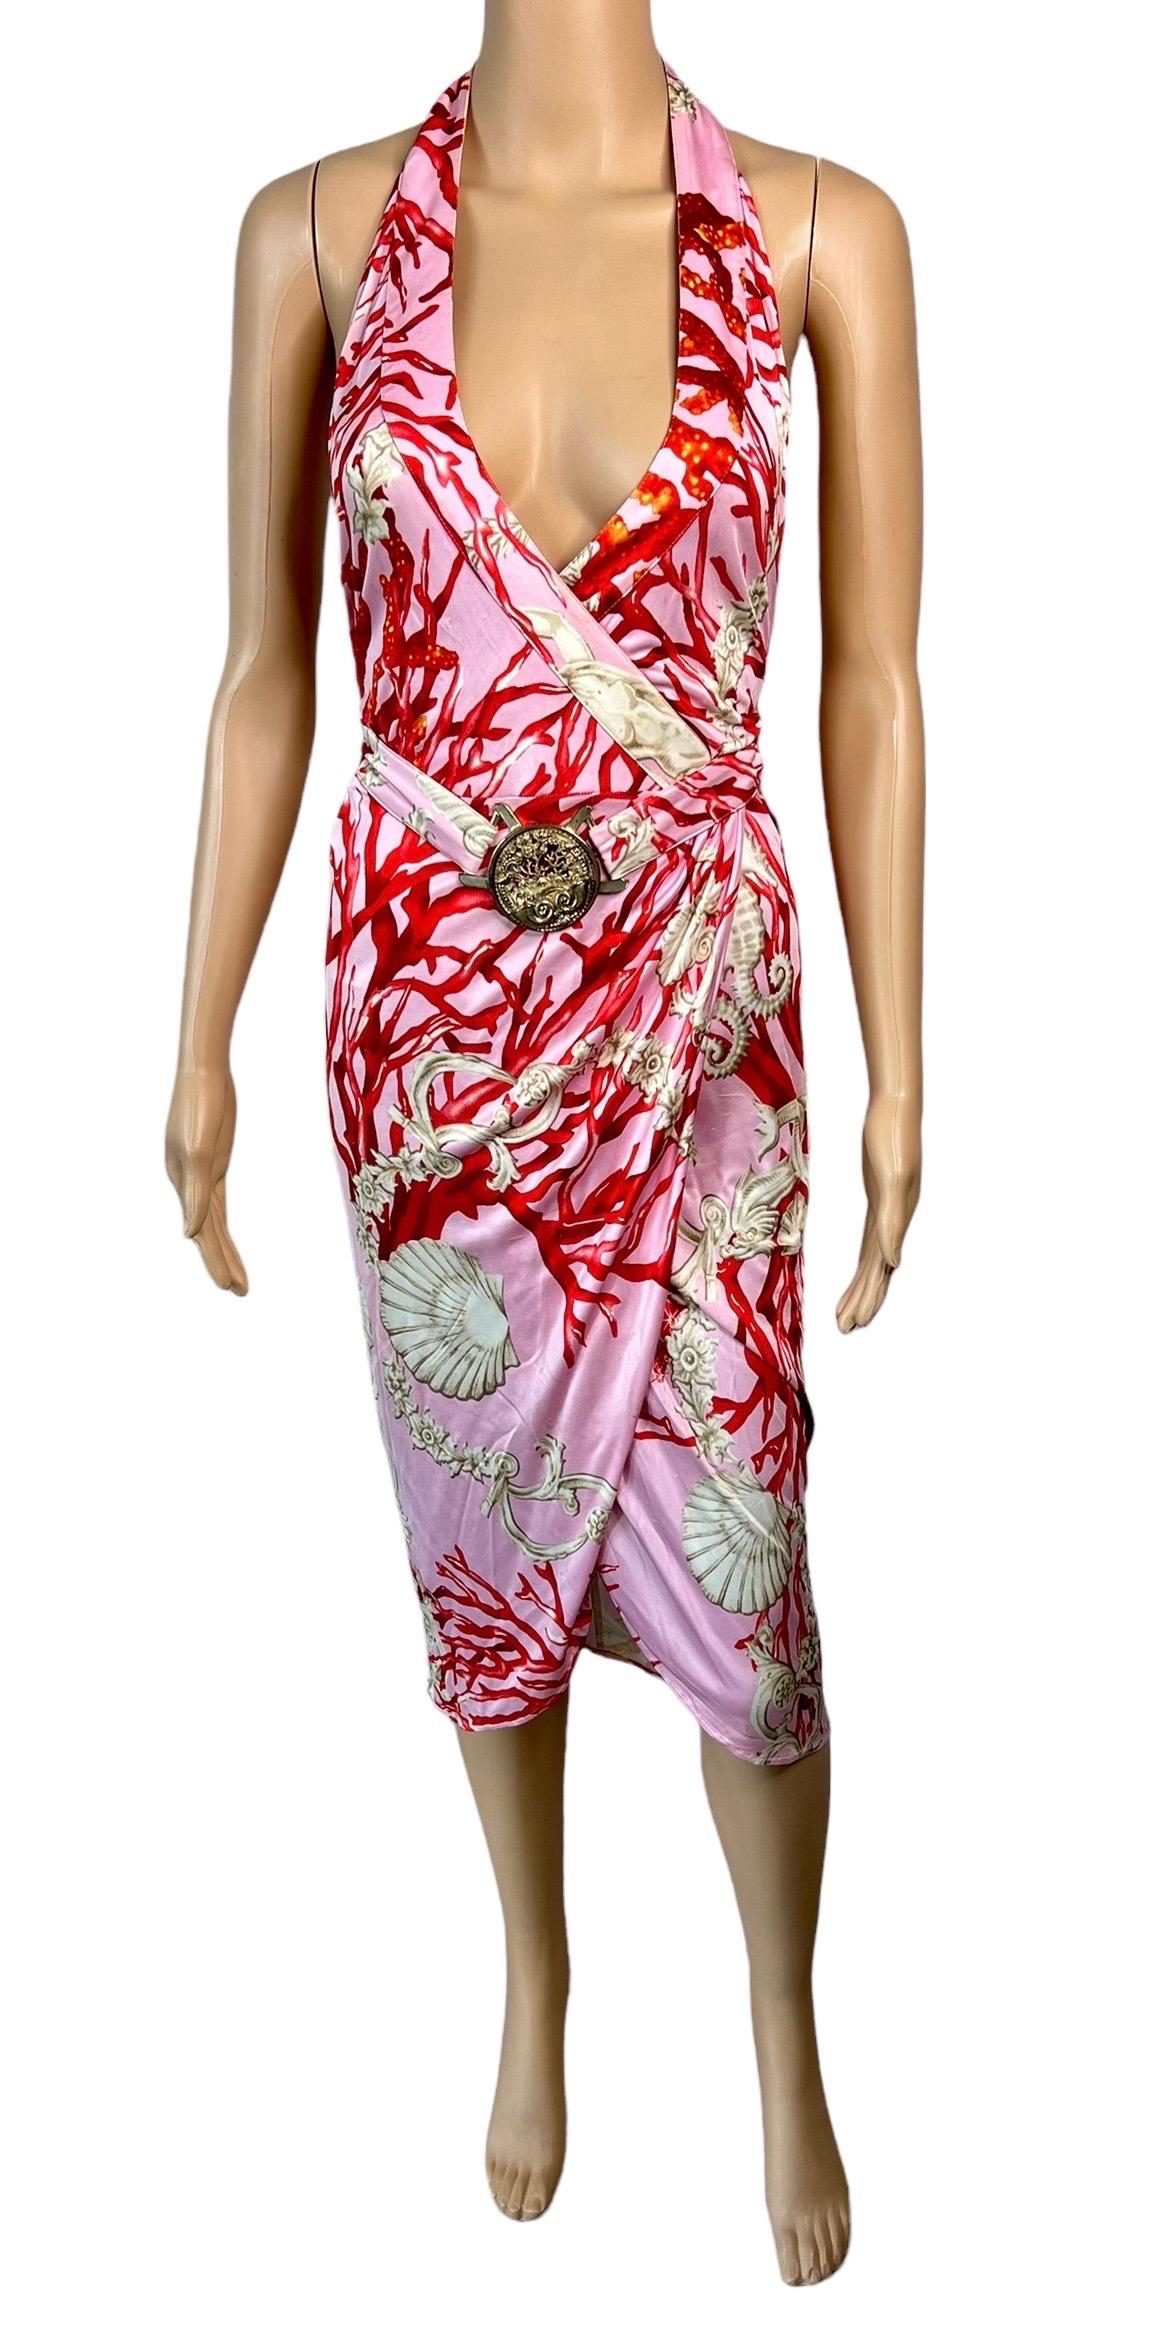 Versace S/S 2005 Plunging Neckline Backless Seashell Print Belted Wrap Dress For Sale 2